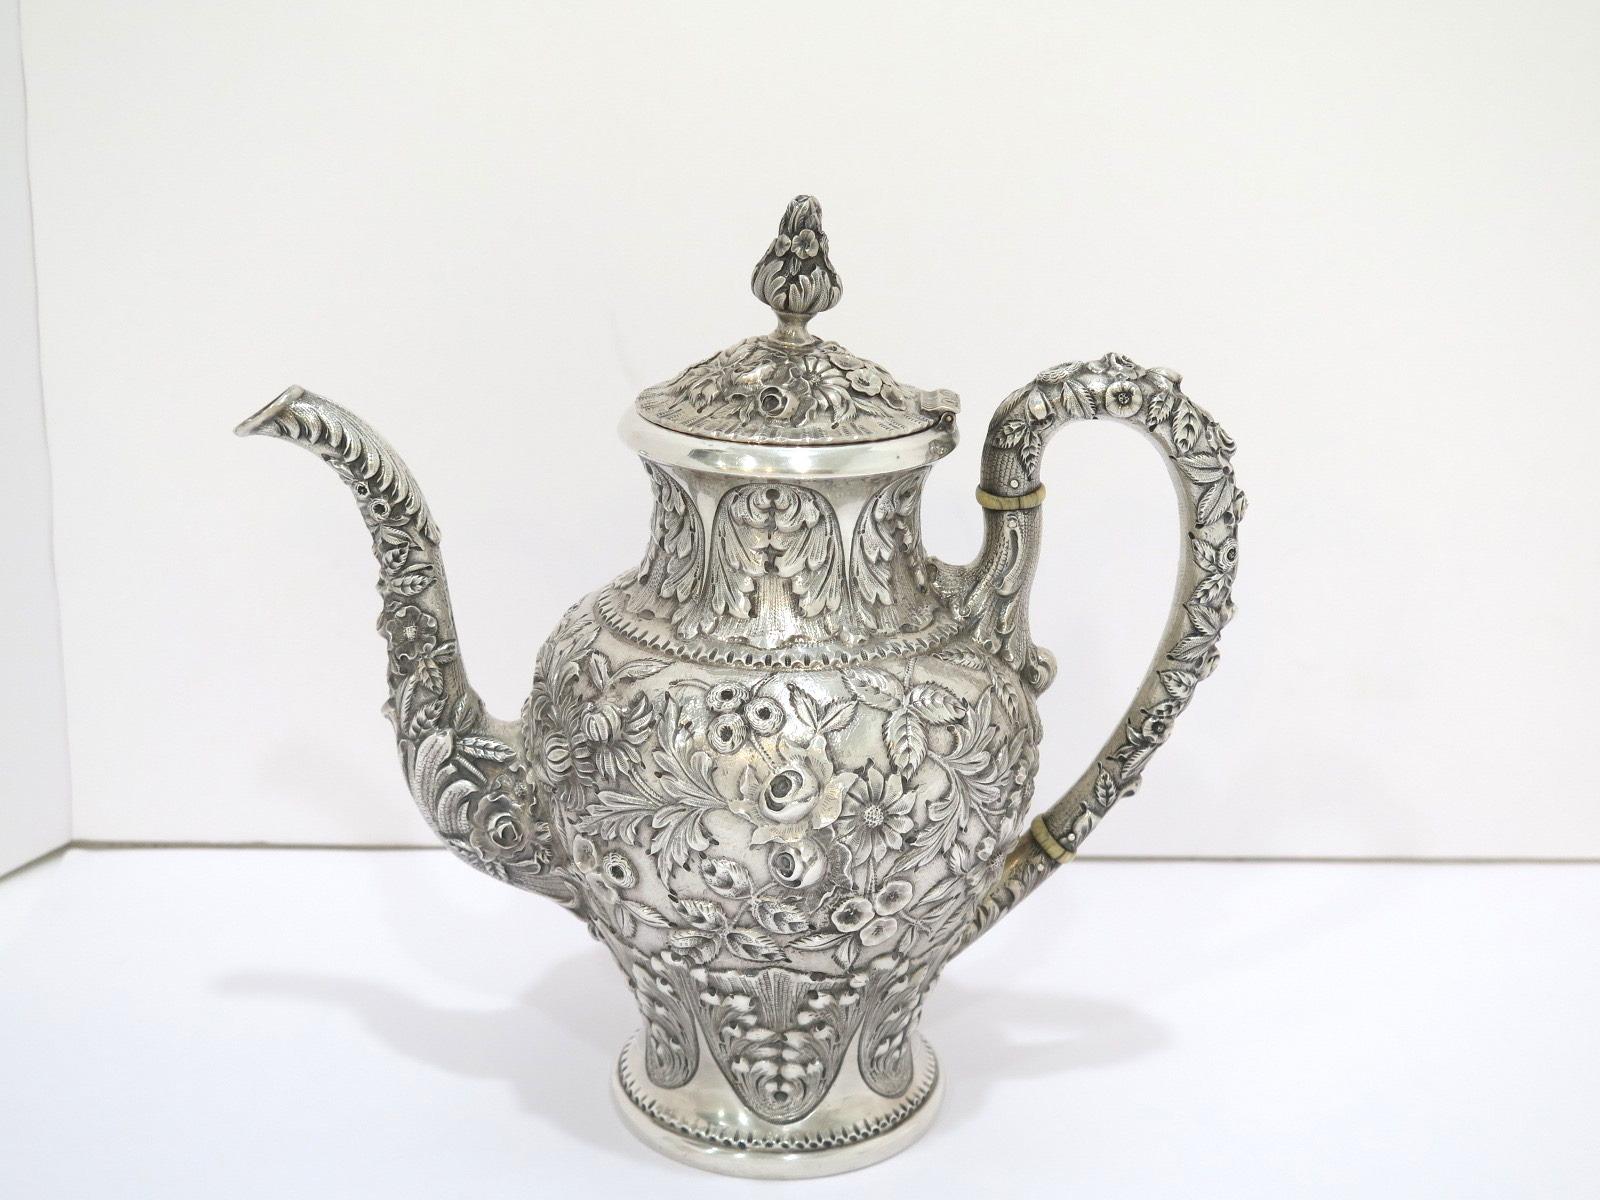 5 Pc Sterling Silver S. Kirk & Son Antique Floral Repousse Tea / Coffee Service In Good Condition For Sale In Brooklyn, NY